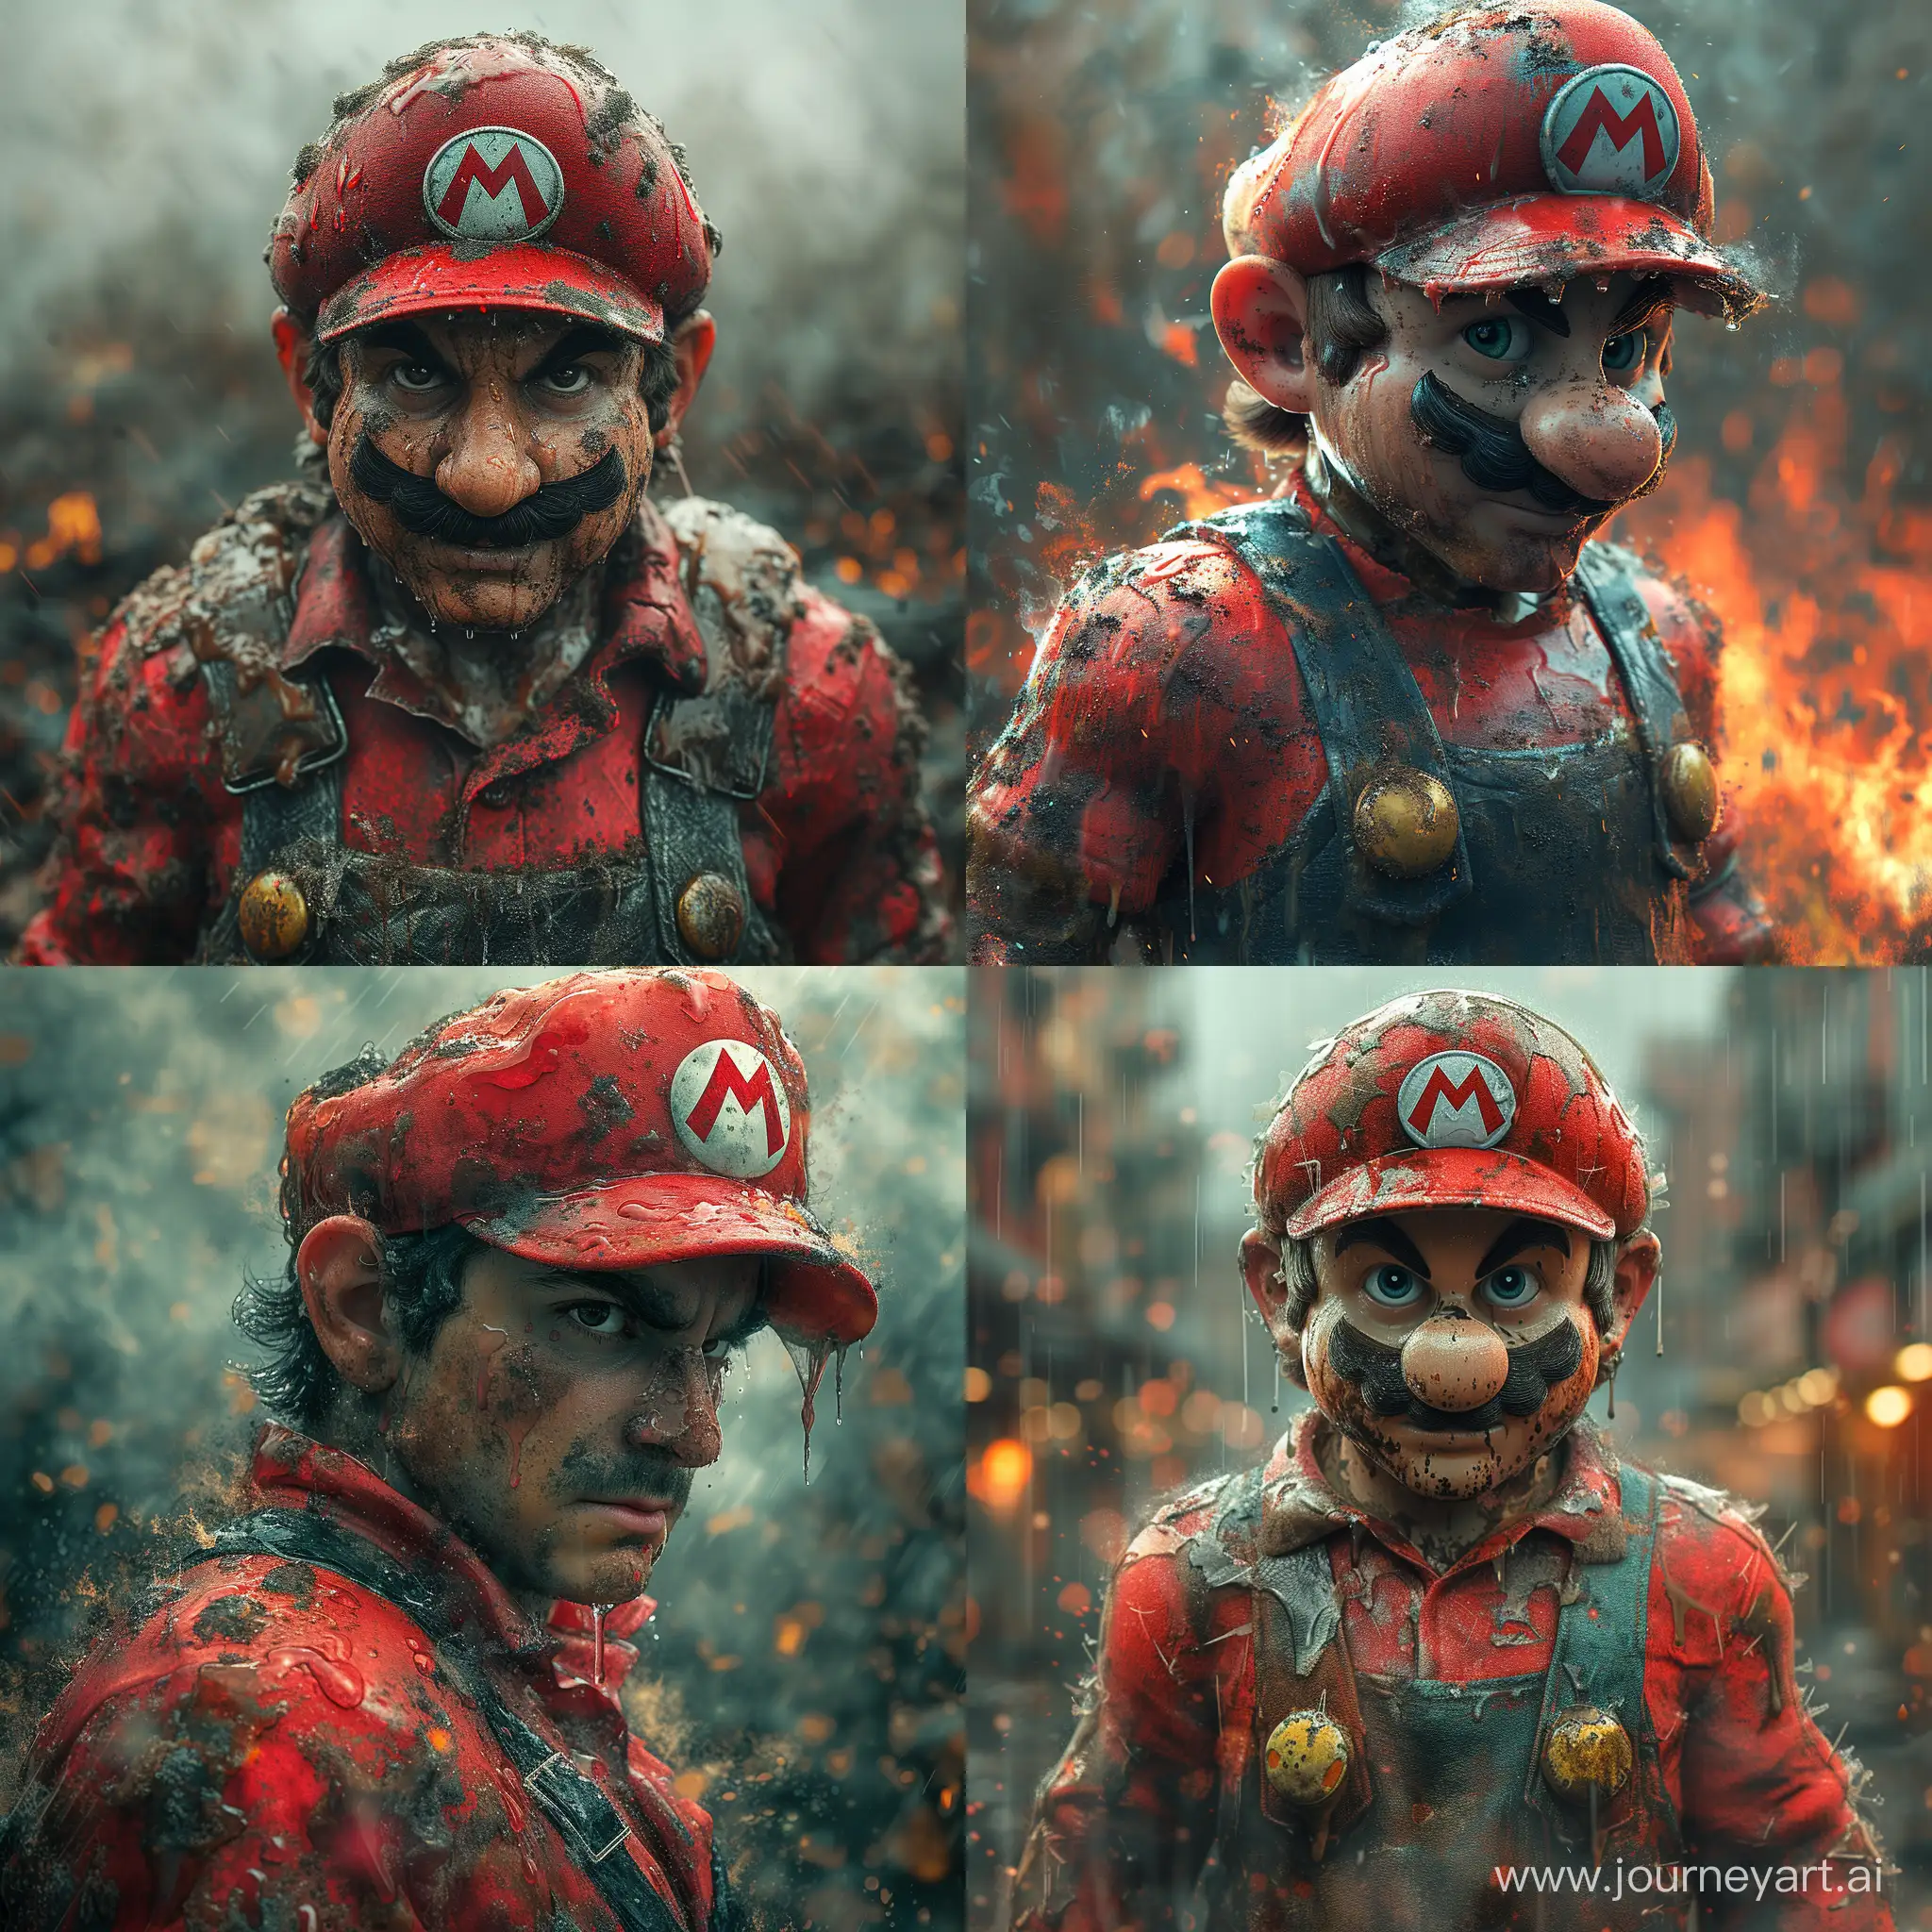 Realistic-Mario-Gritty-Depiction-of-Iconic-Video-Game-Character